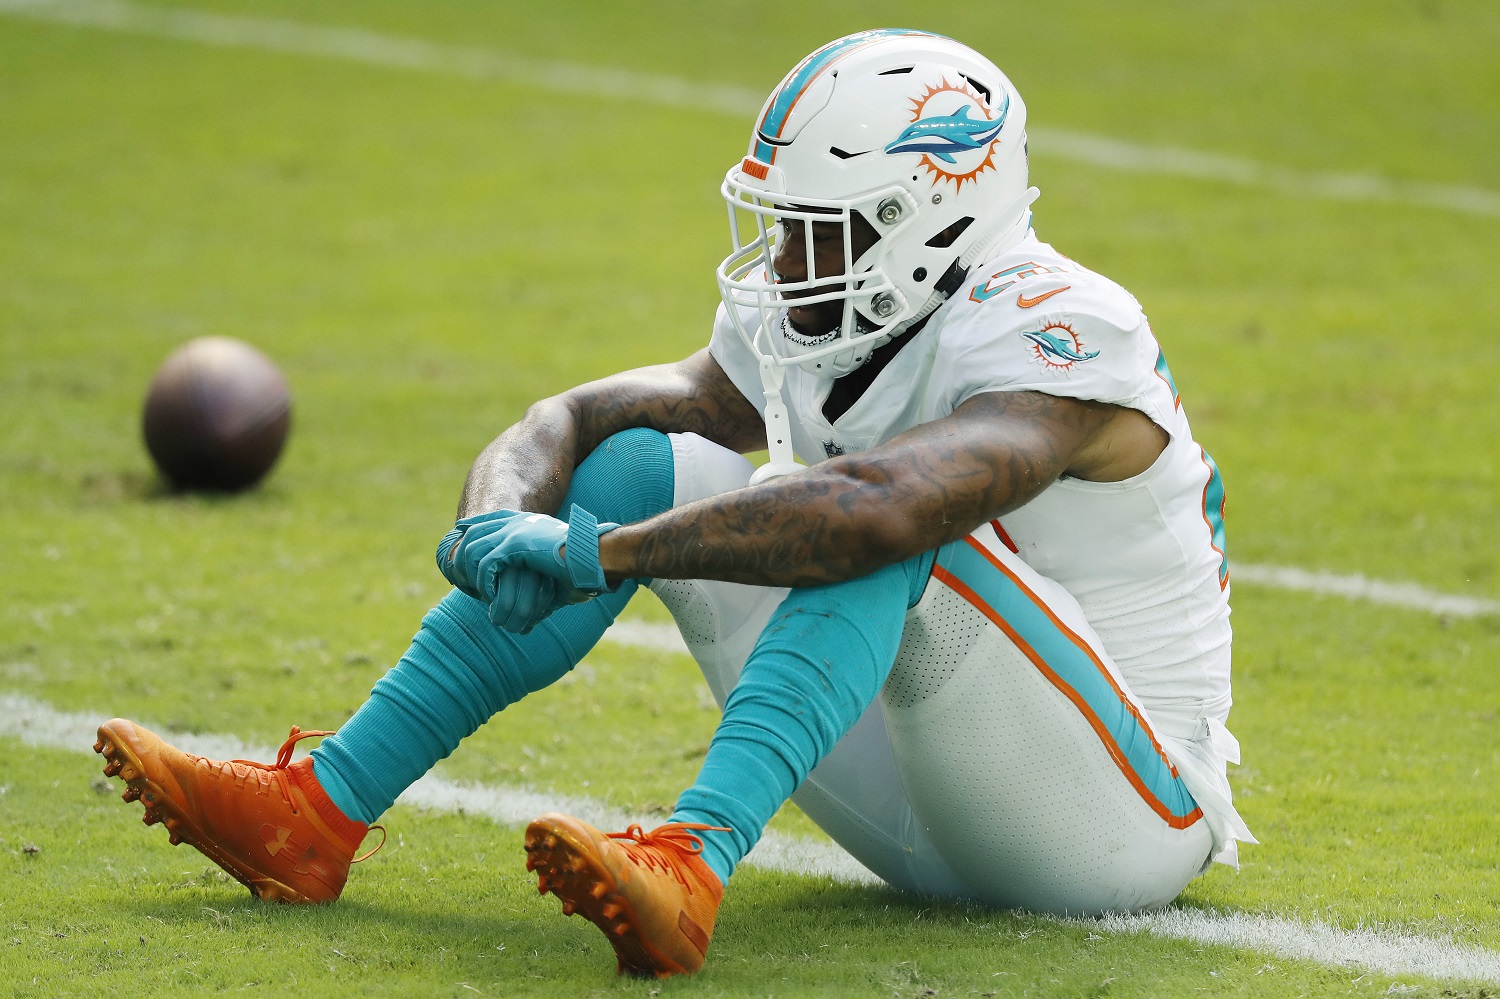 Xavien Howard of the Miami Dolphins reacts after dropping an interception against the Buffalo Bills on Sept. 20, 2020.